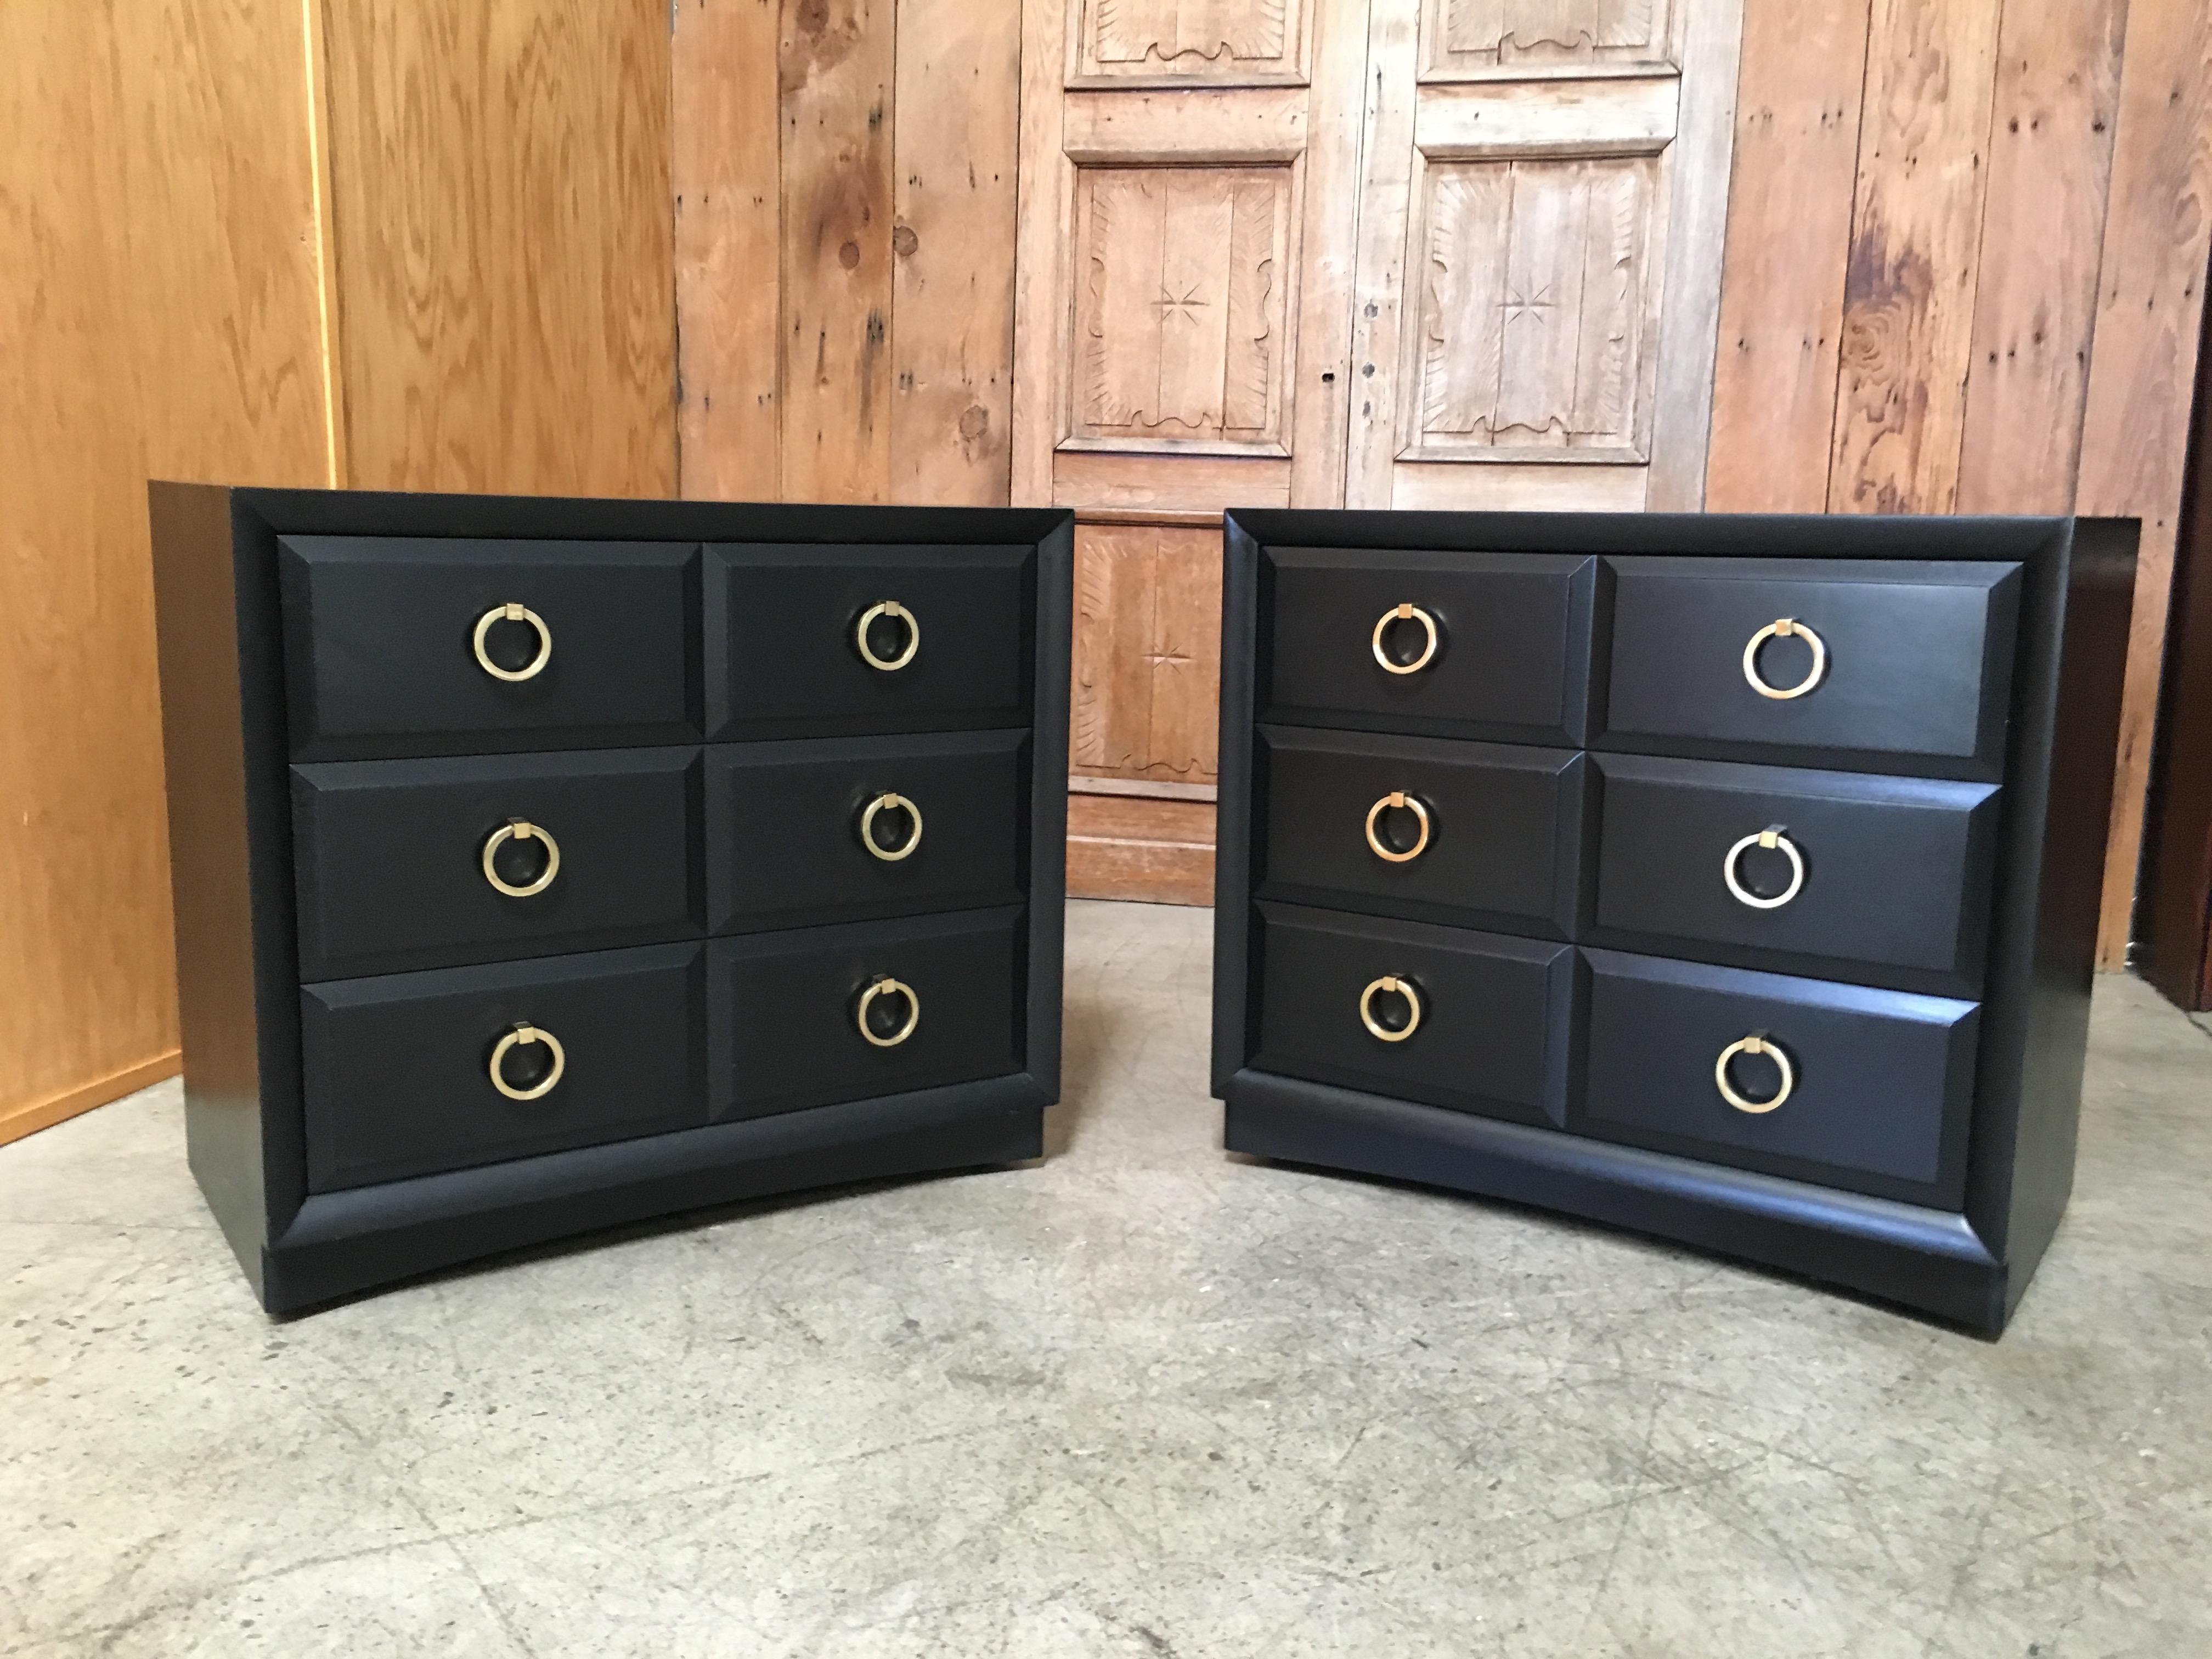 Pair of Classic chest by Robsjohn-Gibbings for Widdicomb. Iconic brass ring pulls. Ebonized wood finish.